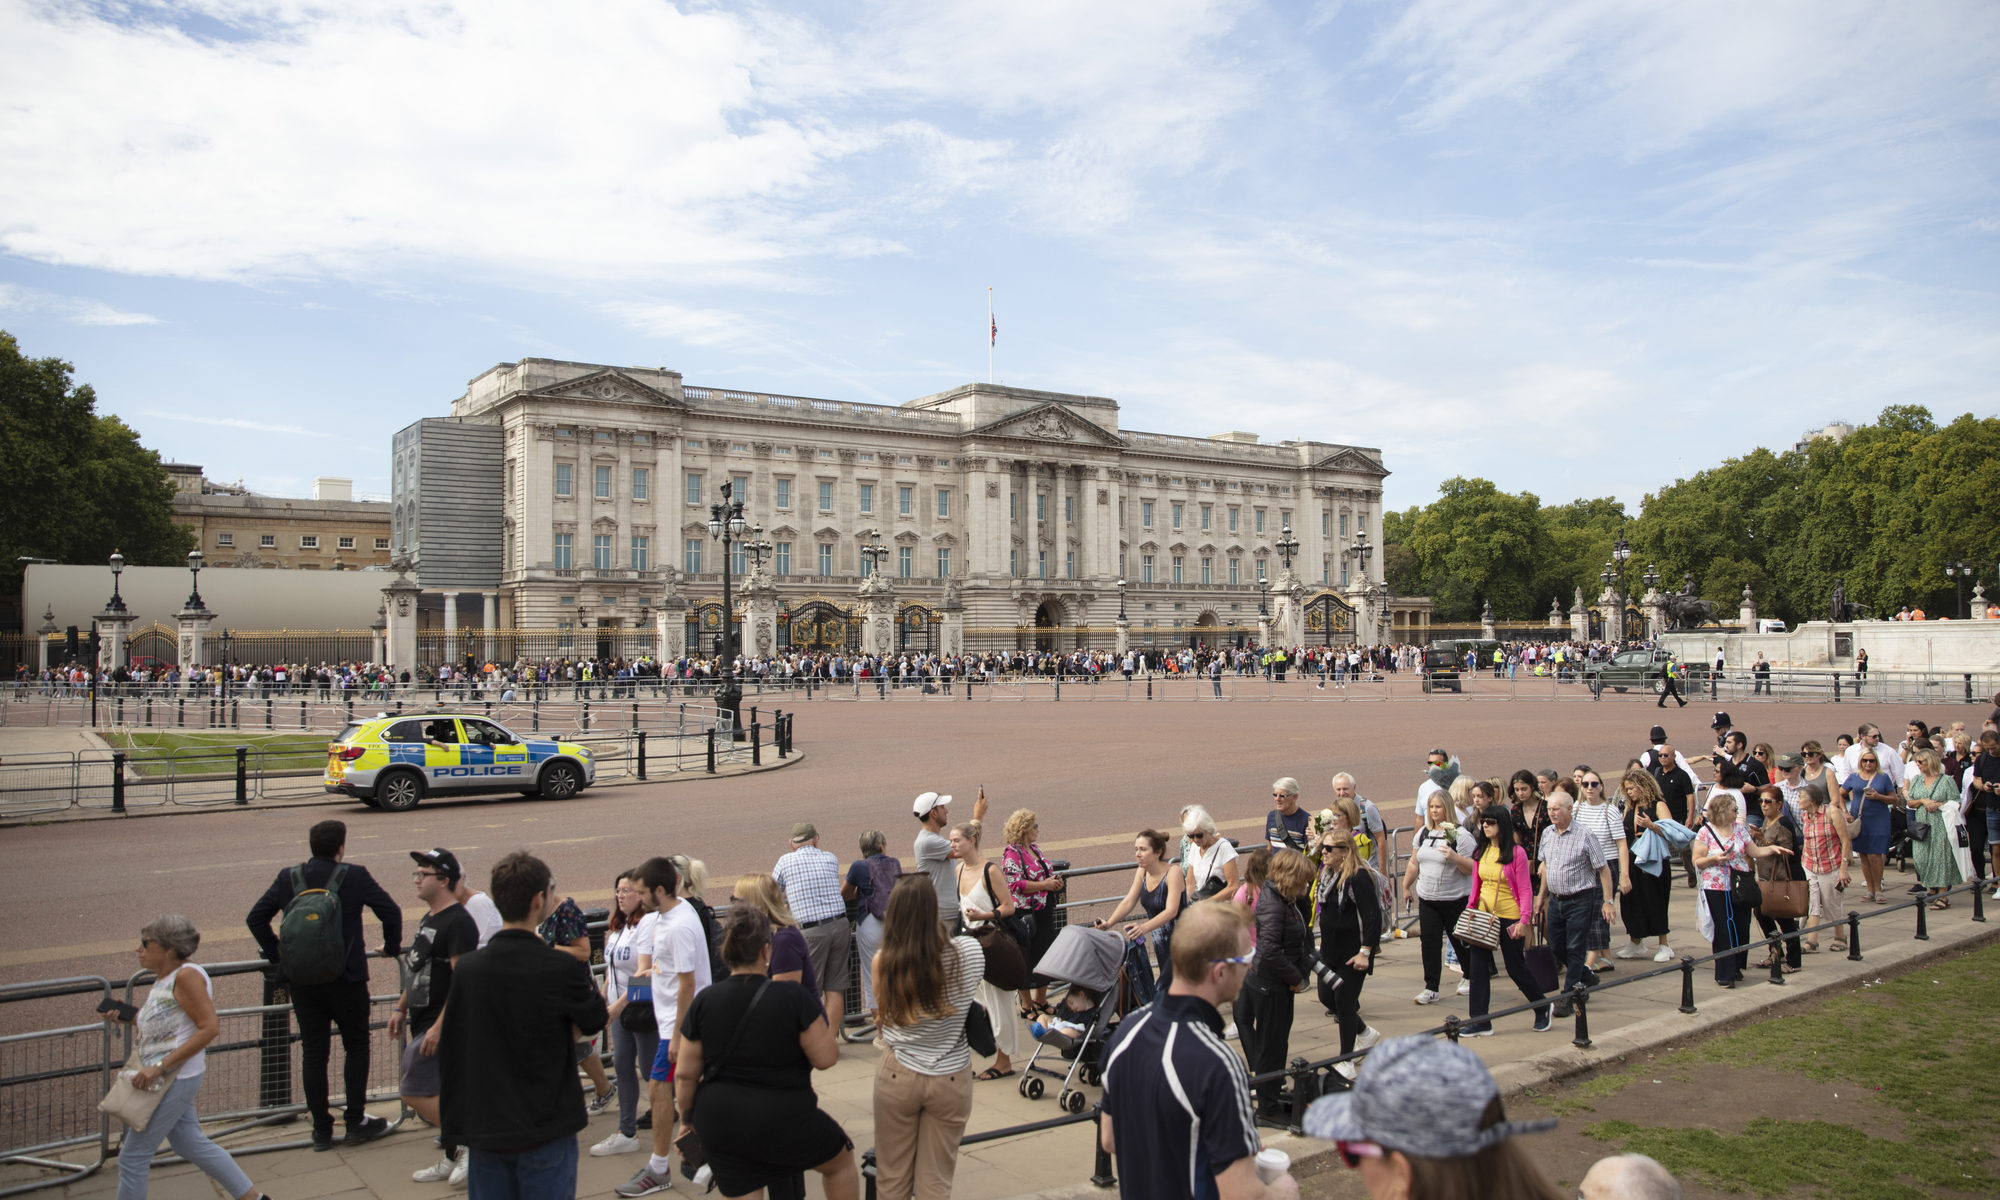 photograph of queue in front of Buckingham Palace